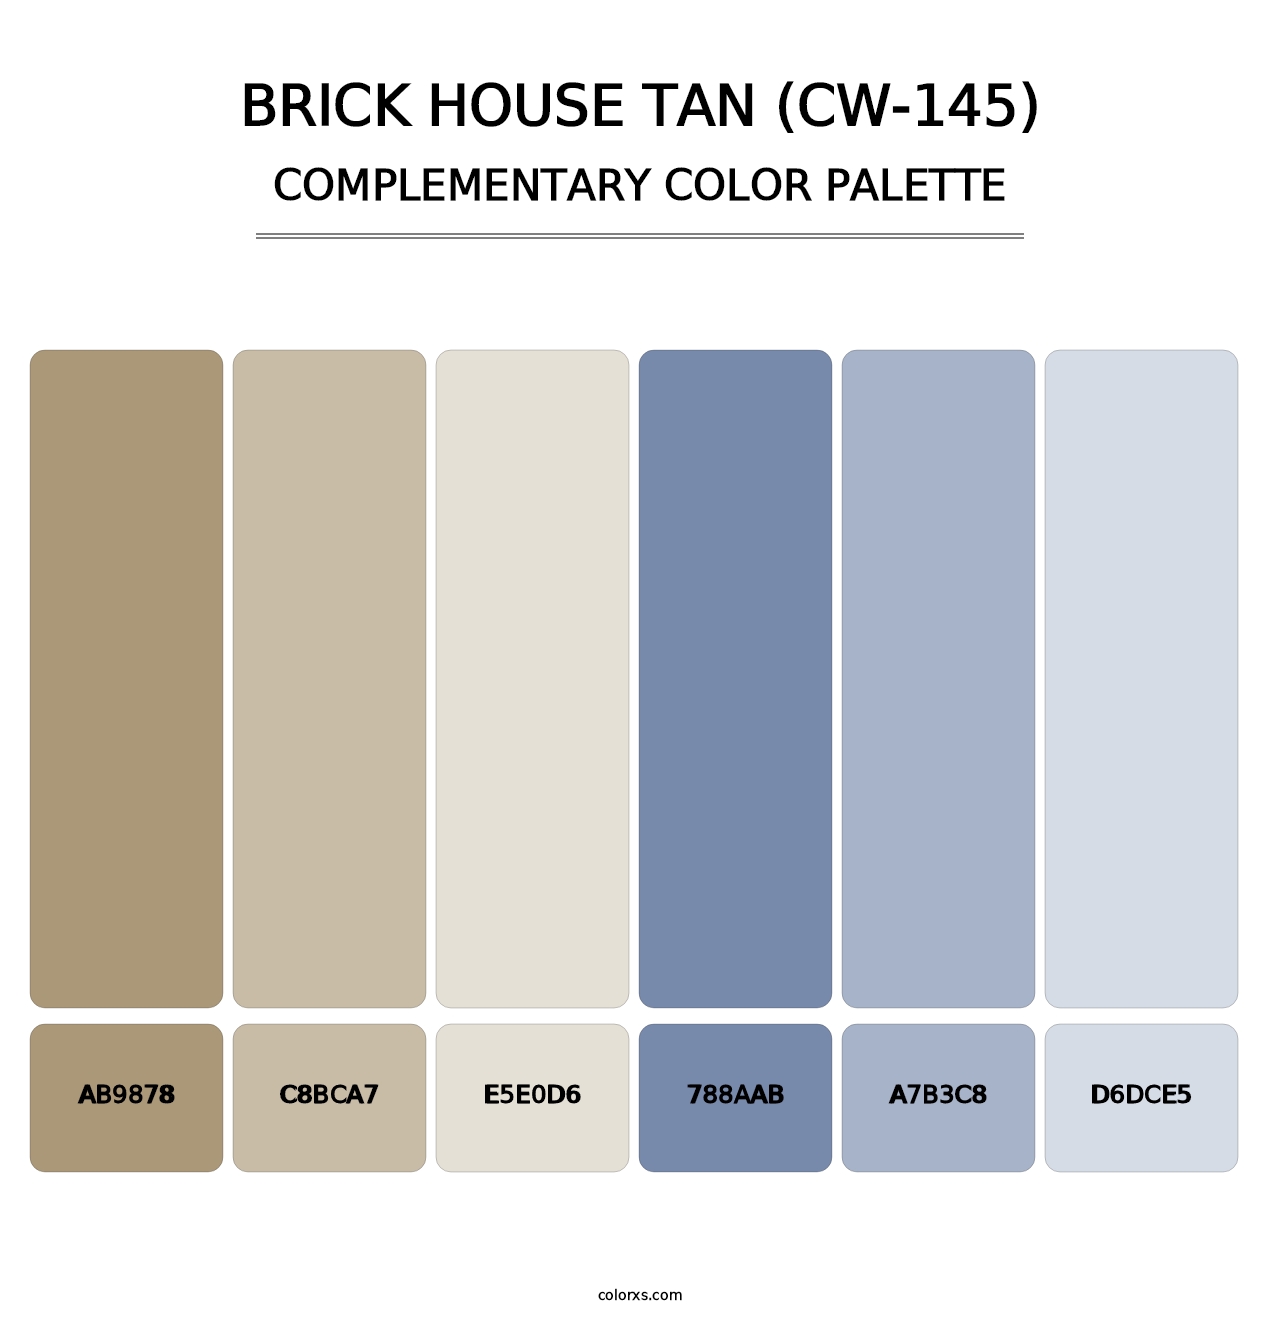 Brick House Tan (CW-145) - Complementary Color Palette